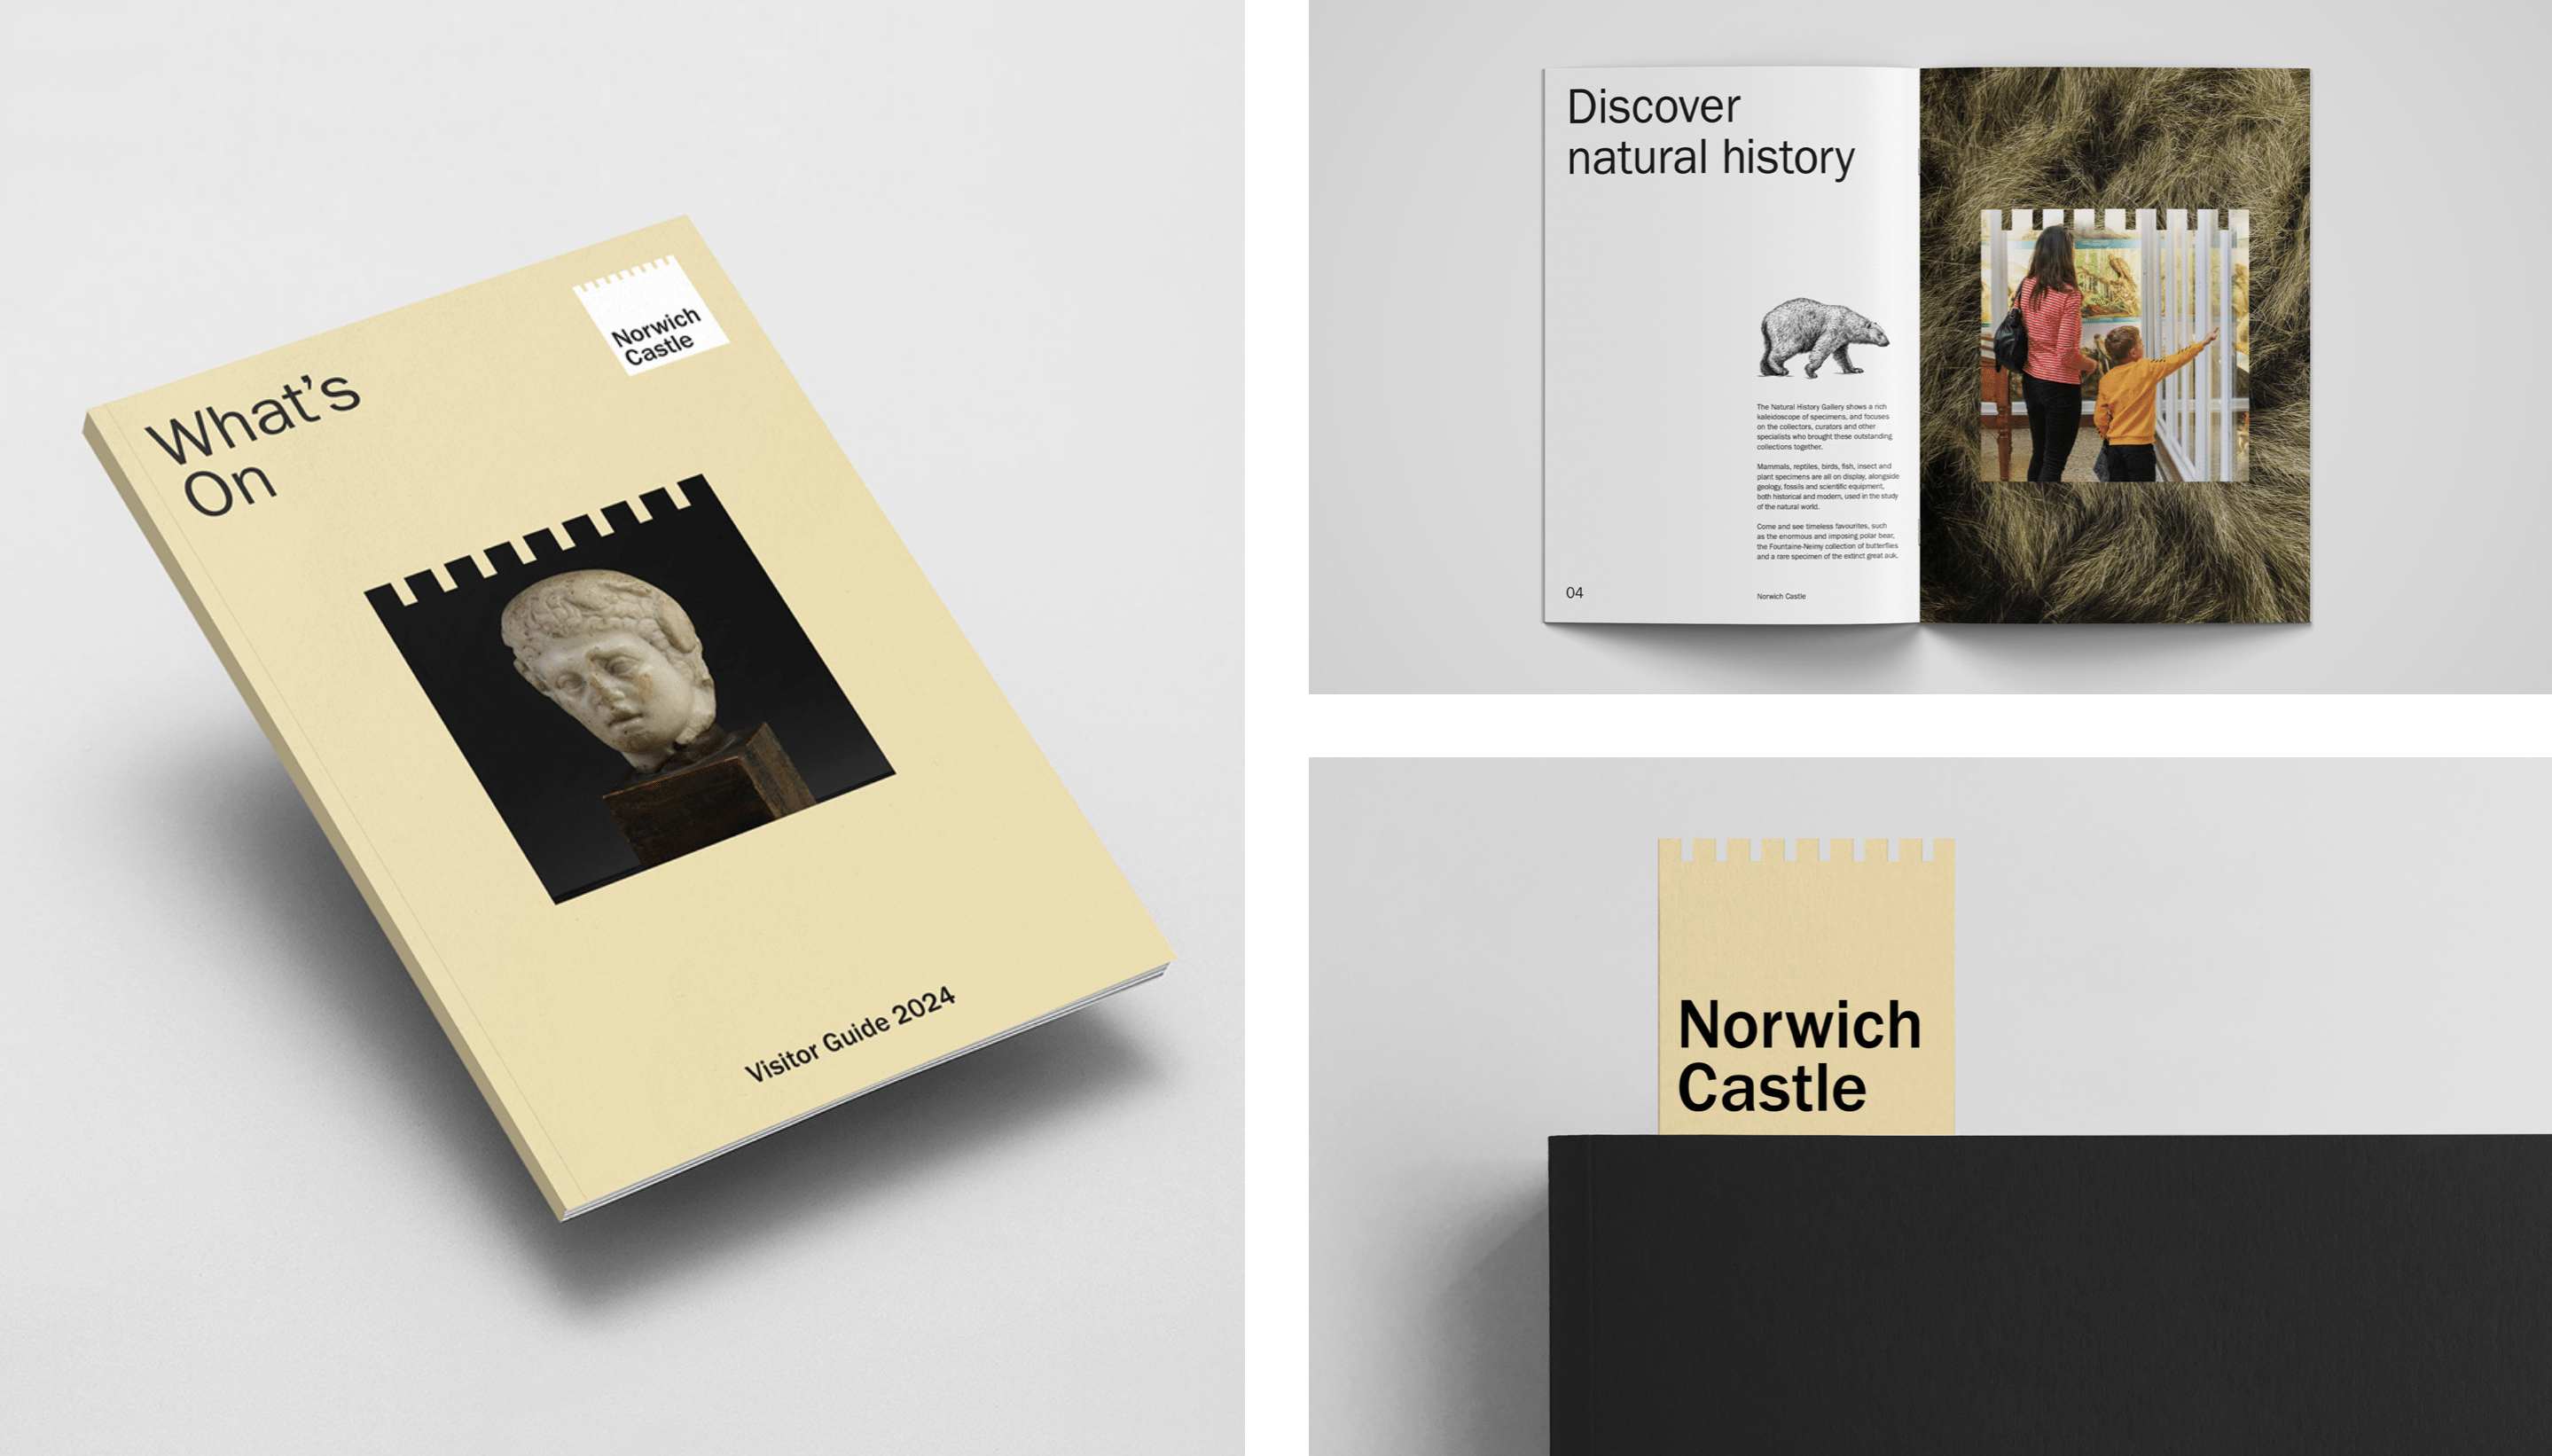 Brand identity, brochure design and bookmark for Norwich Castle designed by The Click. Reviewed by Richard Baird for BP&O